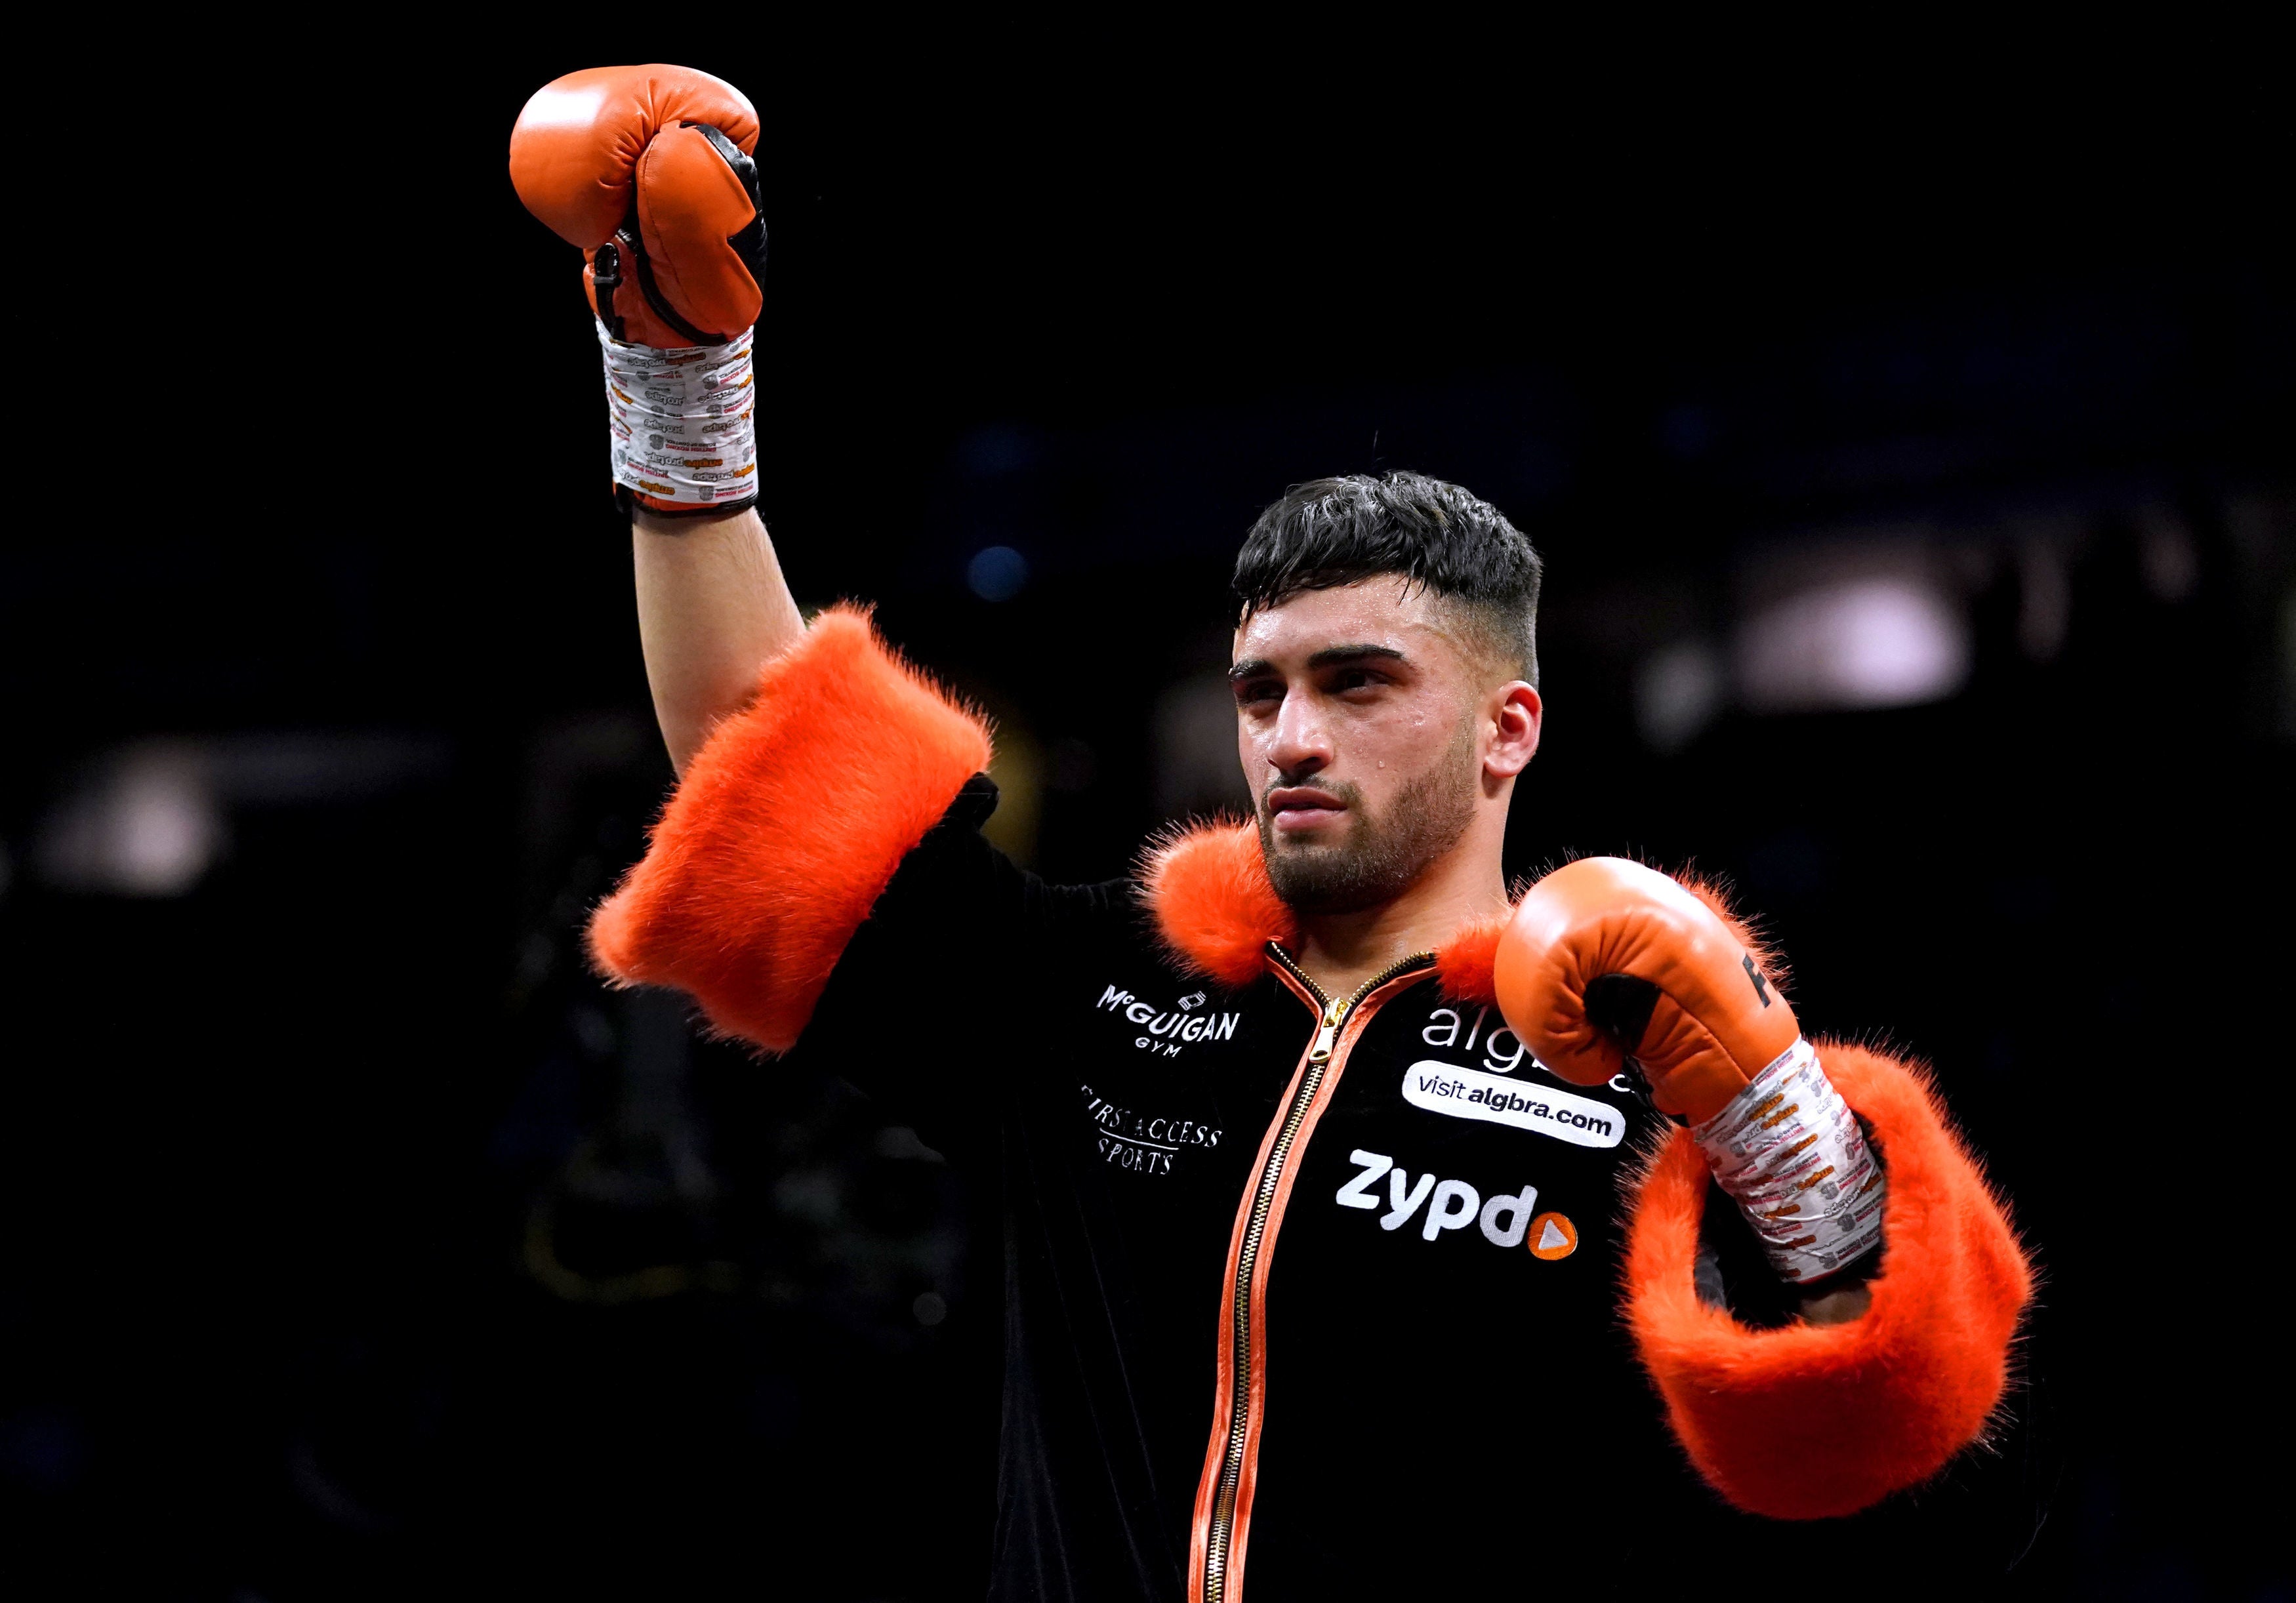 Adam Azim is 6-0 as a professional with five knockout wins